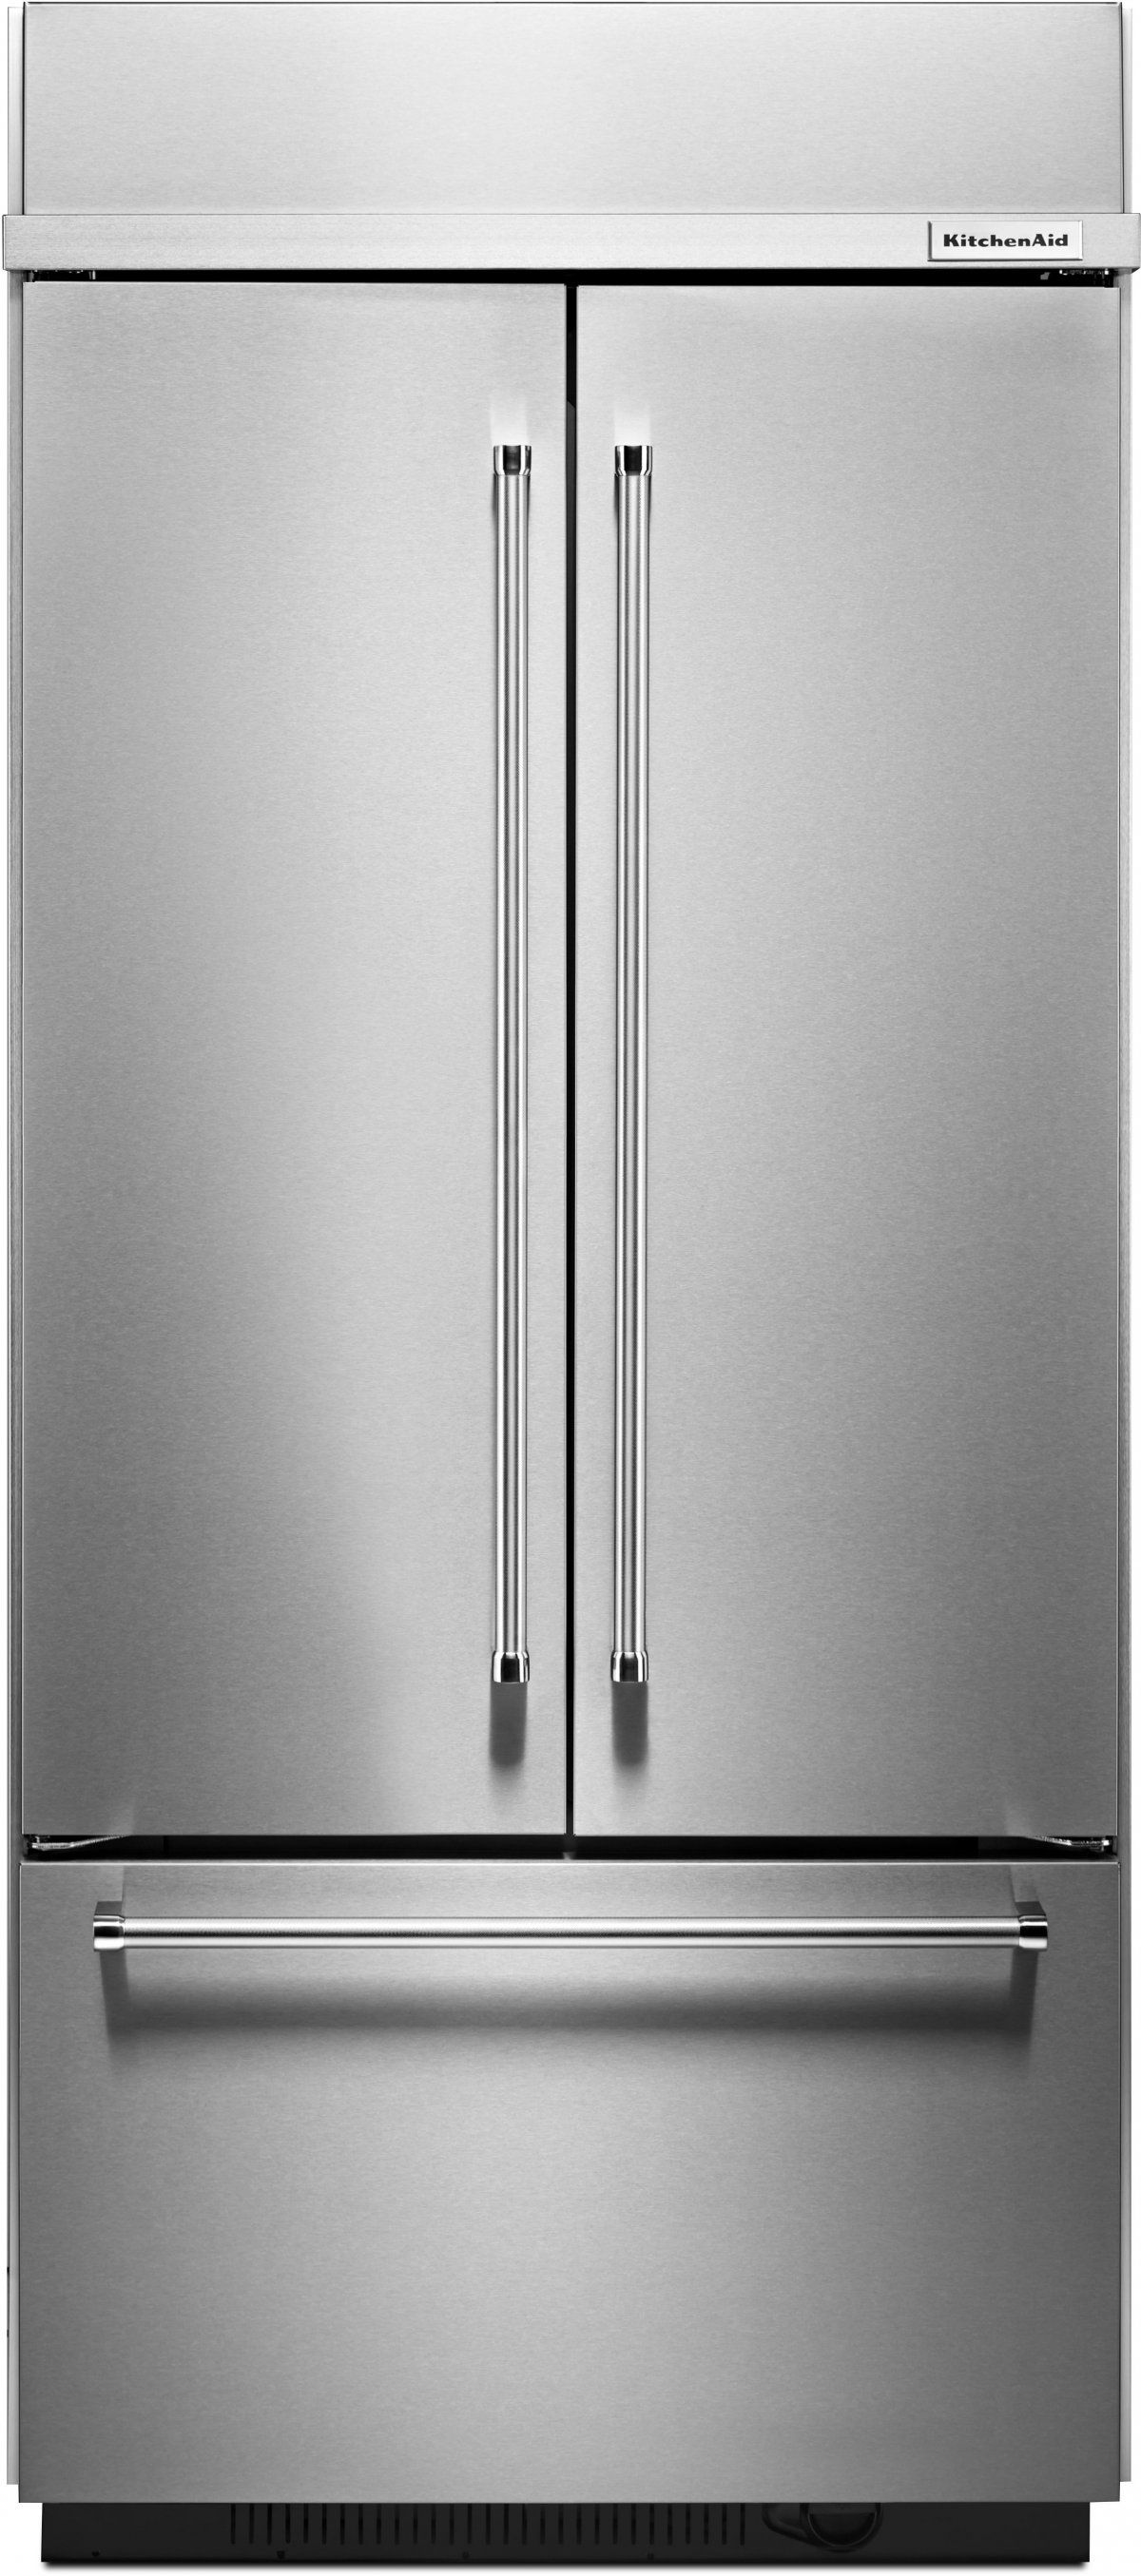 KitchenAid® 20.81 Cu. Ft. Stainless Steel Built In French Door Refrigerator